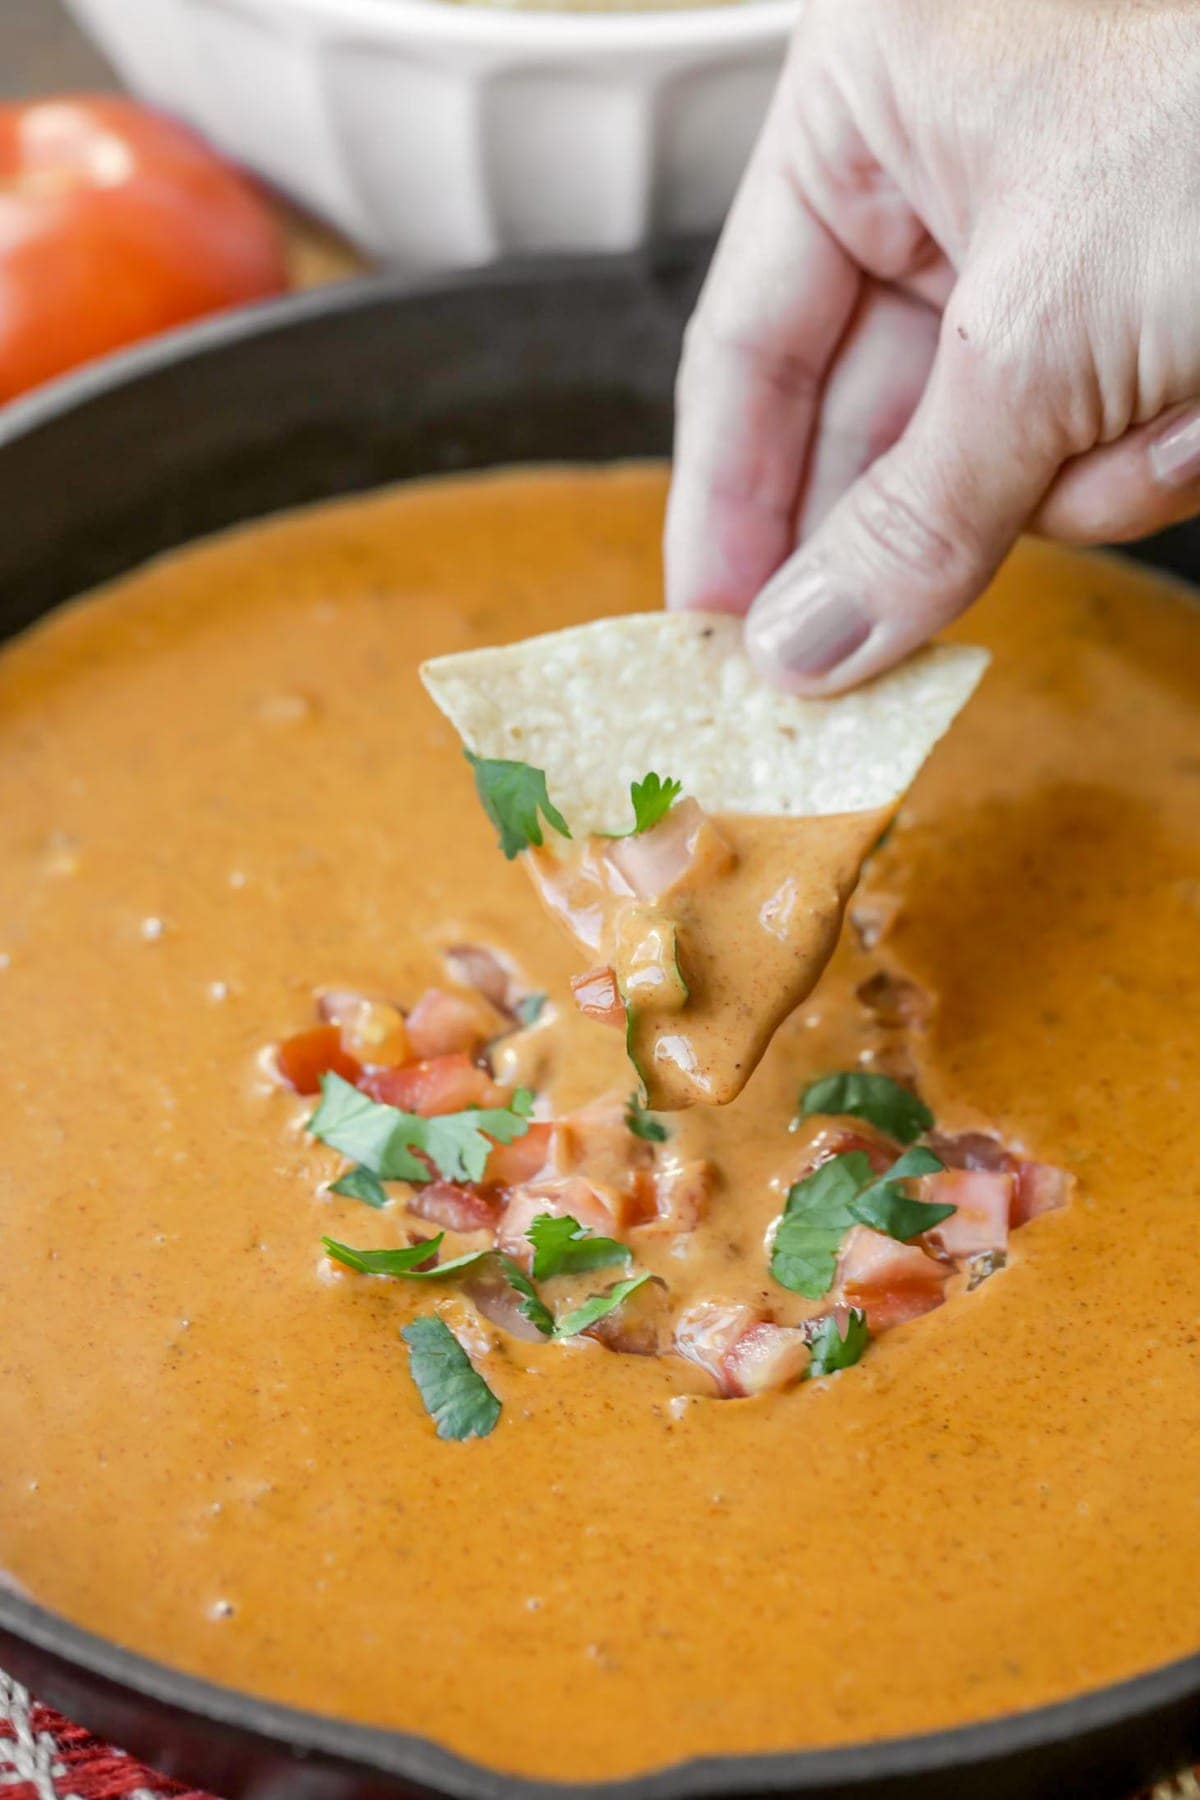 Chili's skillet Queso topped with cilantro and tomatoes.